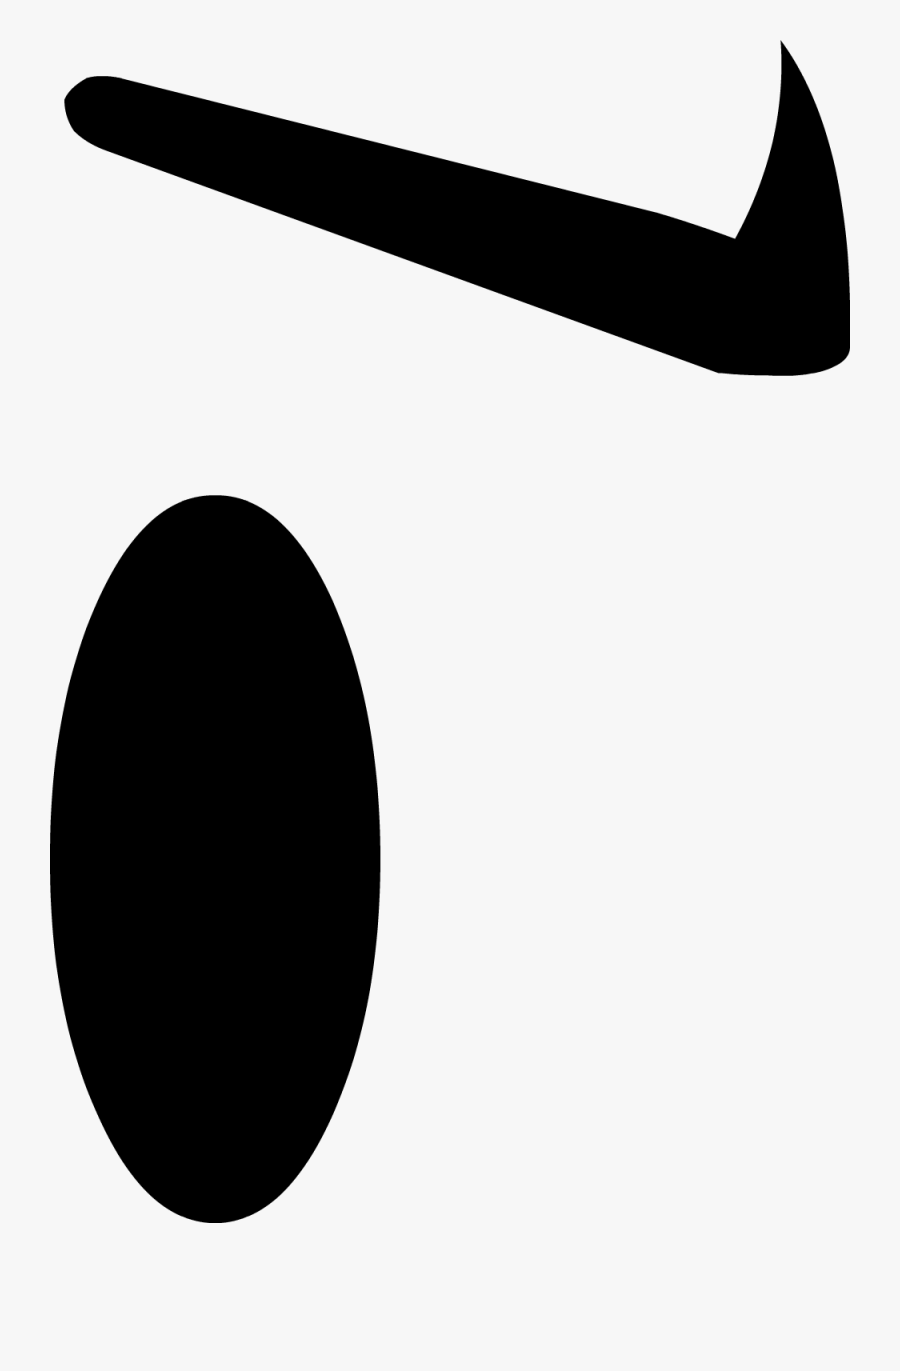 Angry Eye - Bfdi Angry Eyes Bfdi , Free Transparent Clipart - ClipartKey